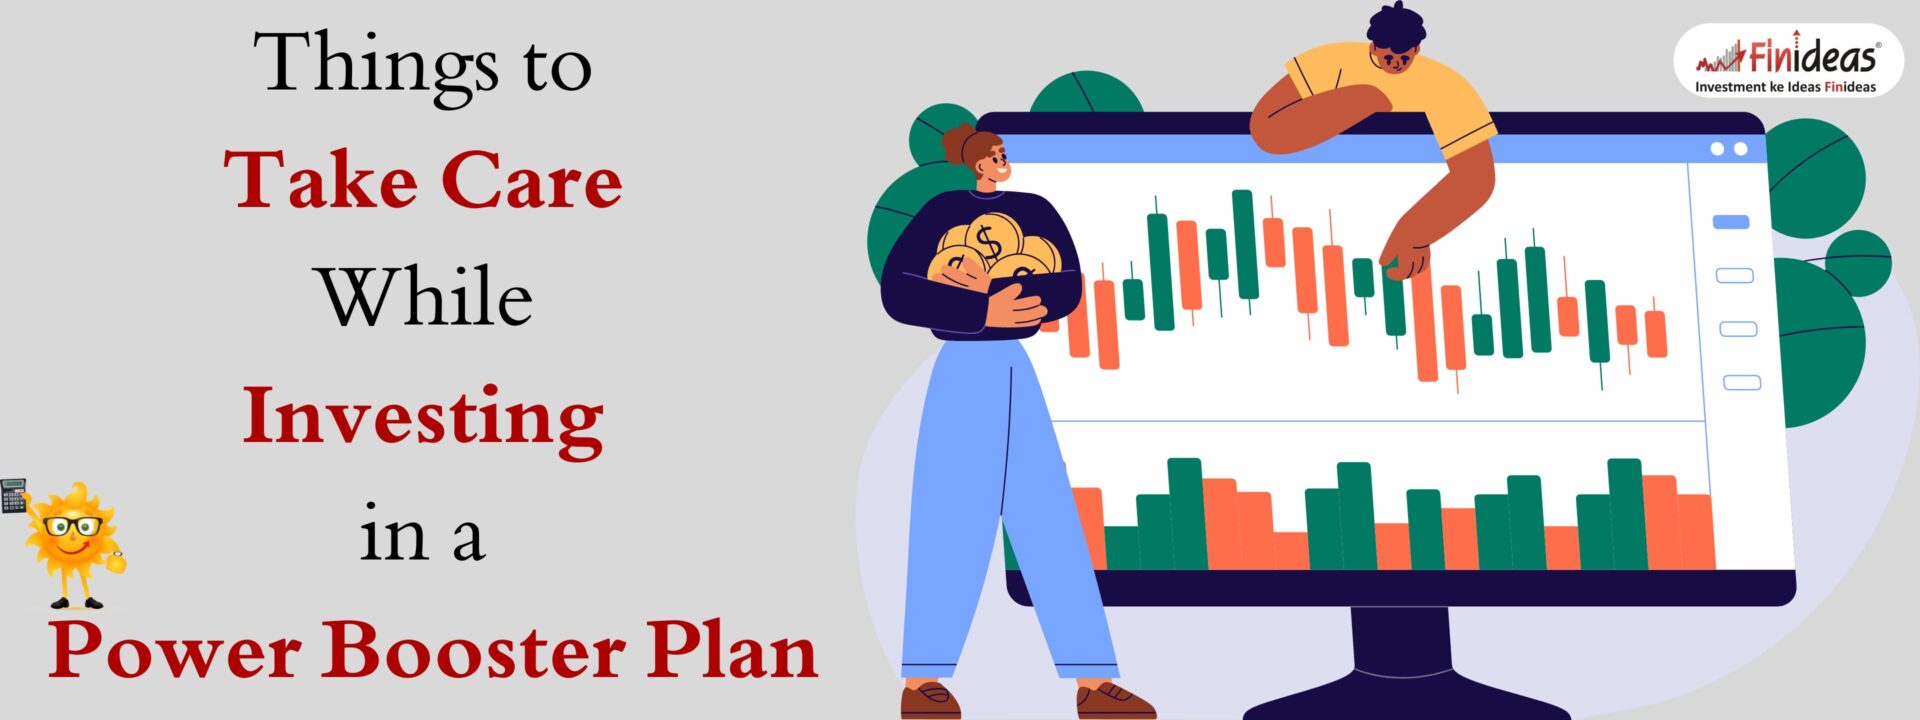 Things to Take Care While Investing in a Power Booster Plan